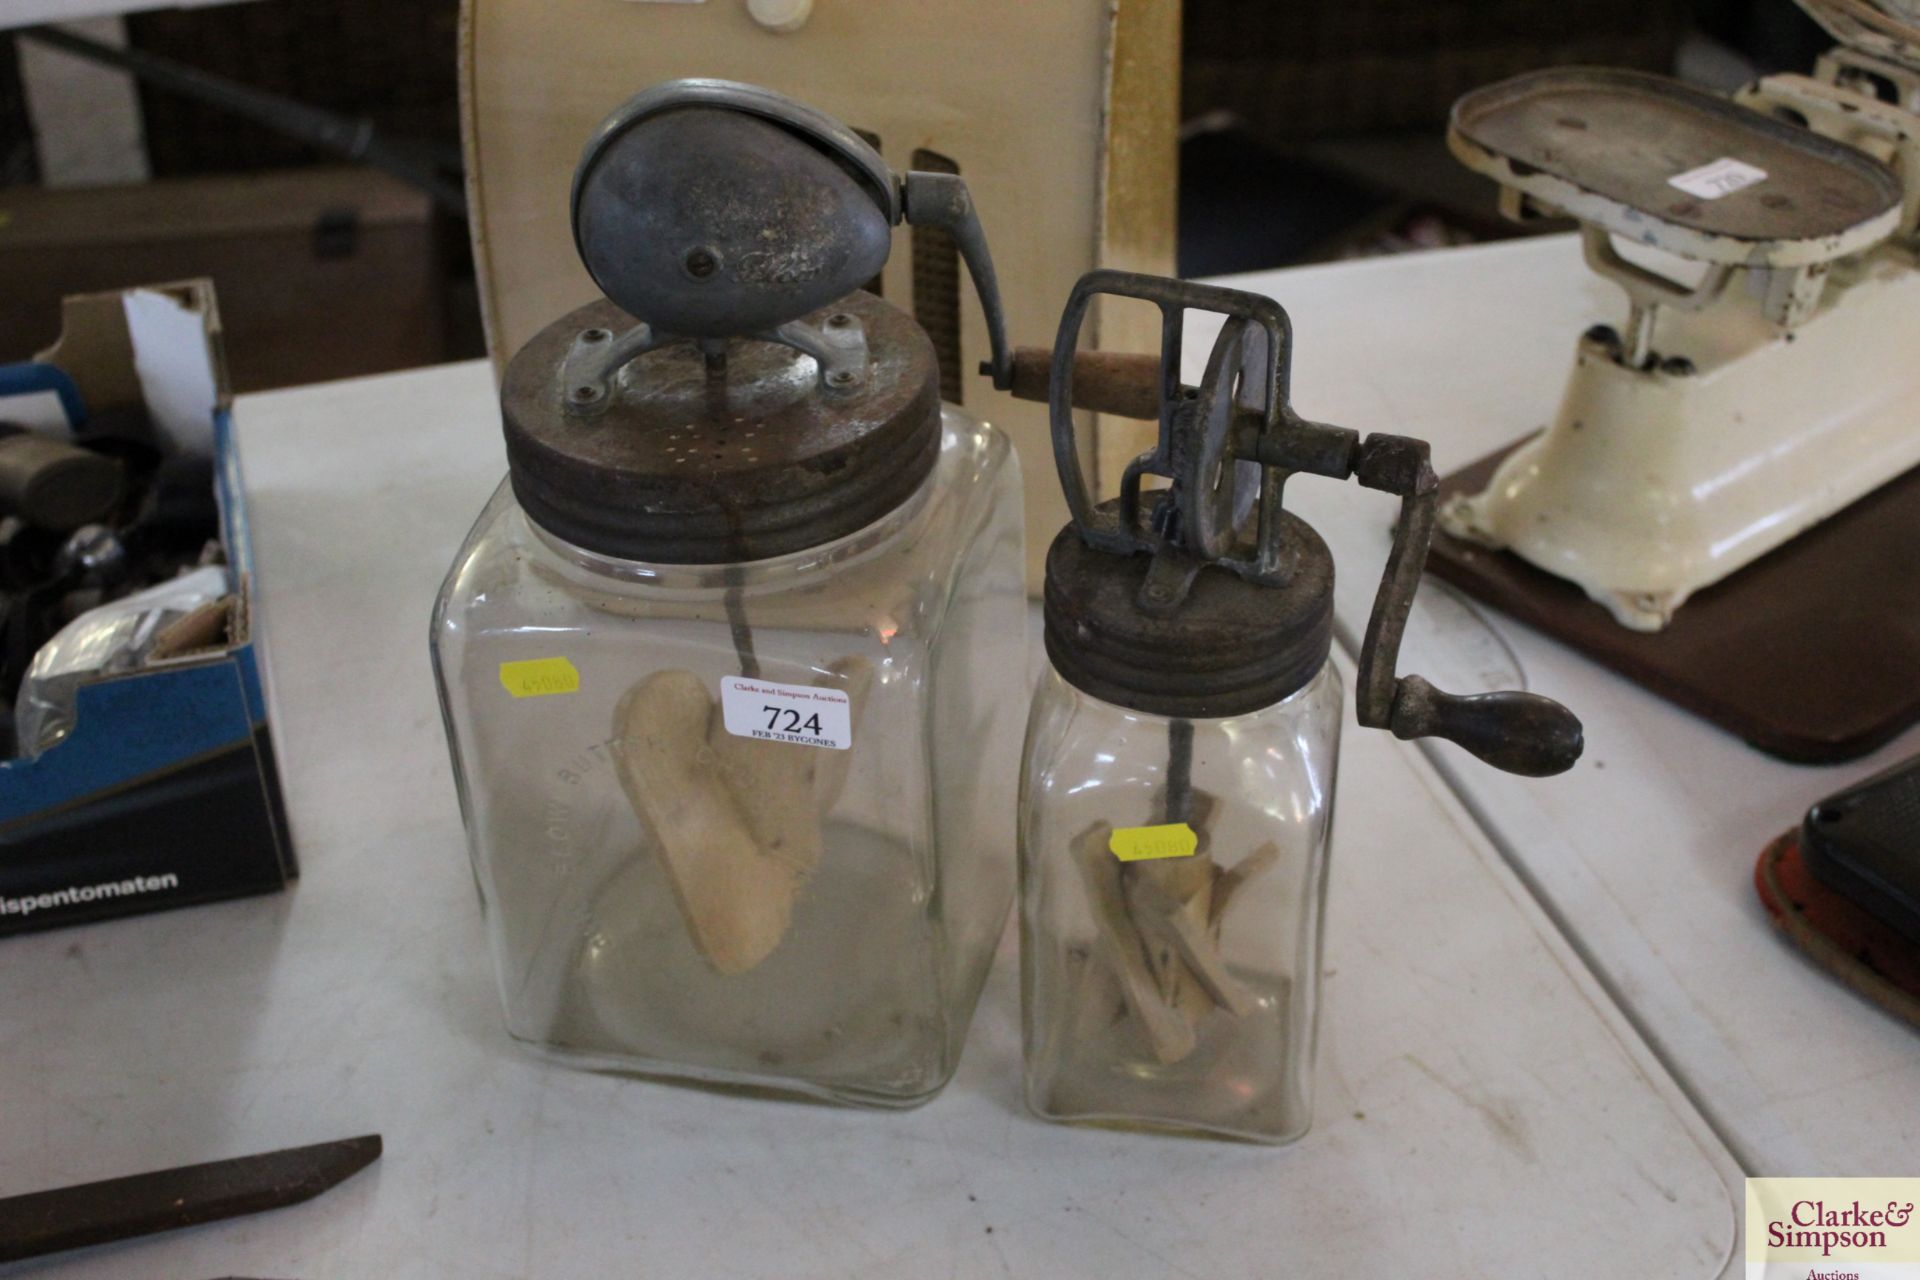 A glass Blow butter churn and a smaller similar